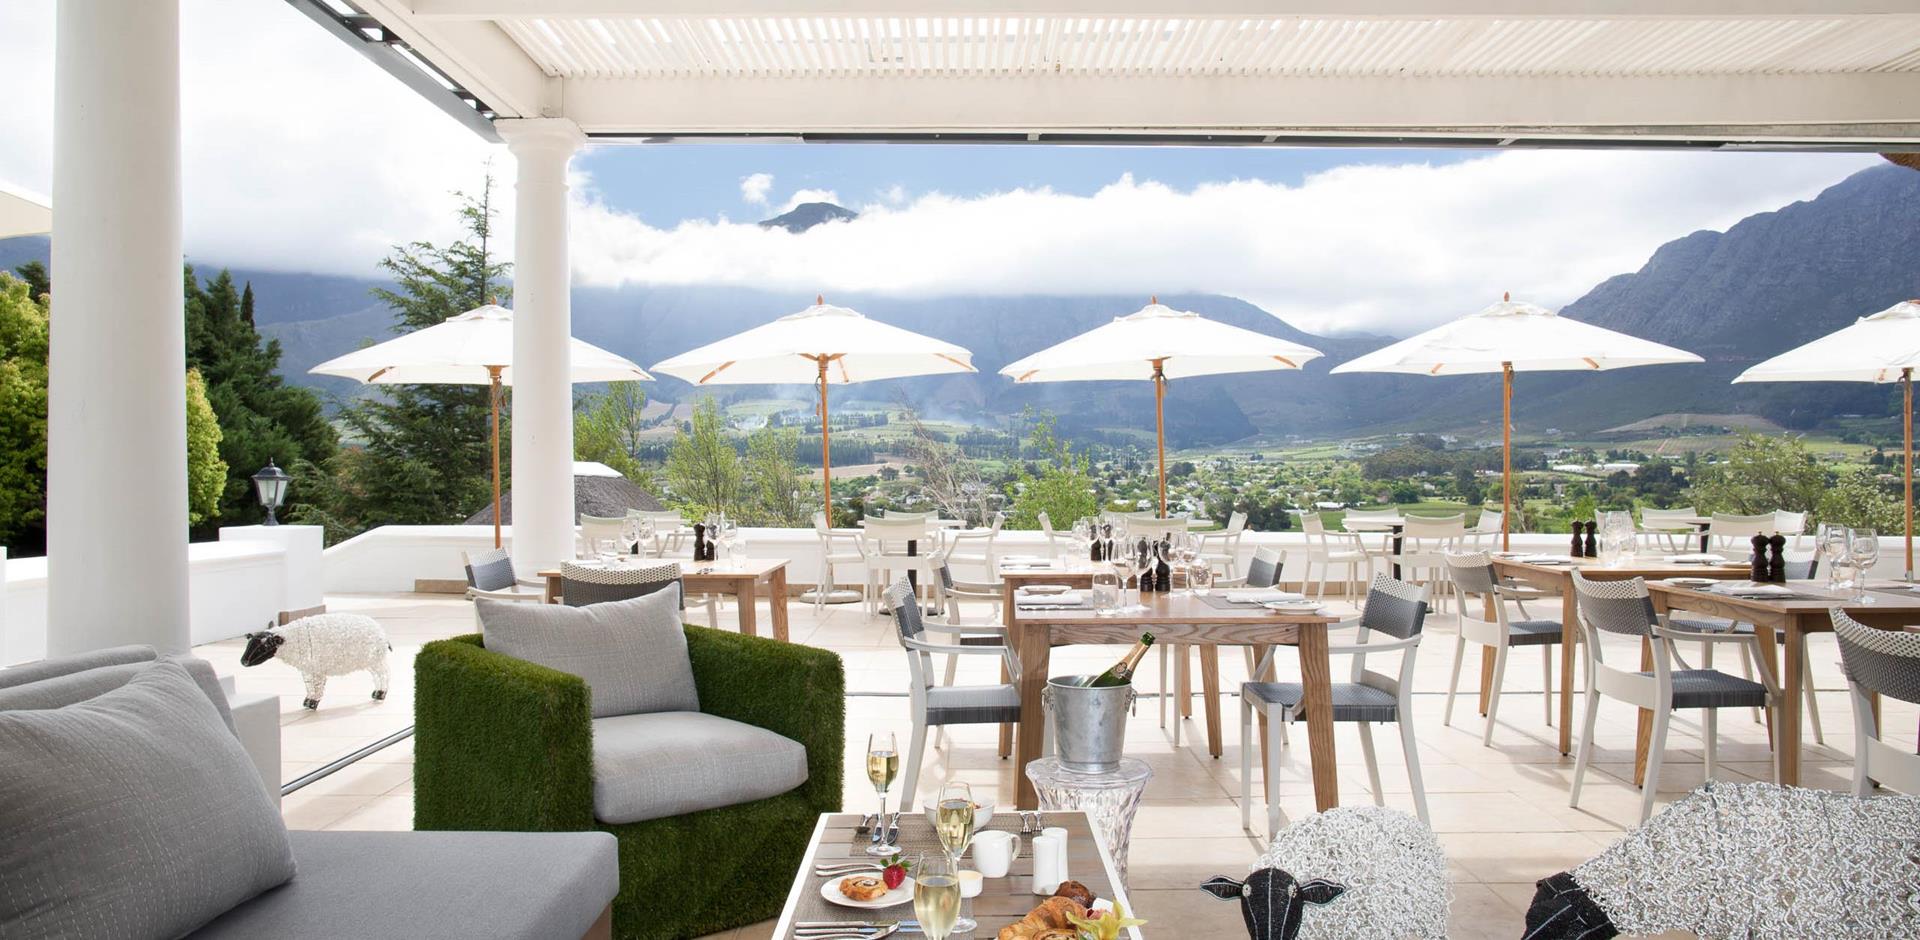 Outdoor dining, Mont Rochelle, South Africa, A&K